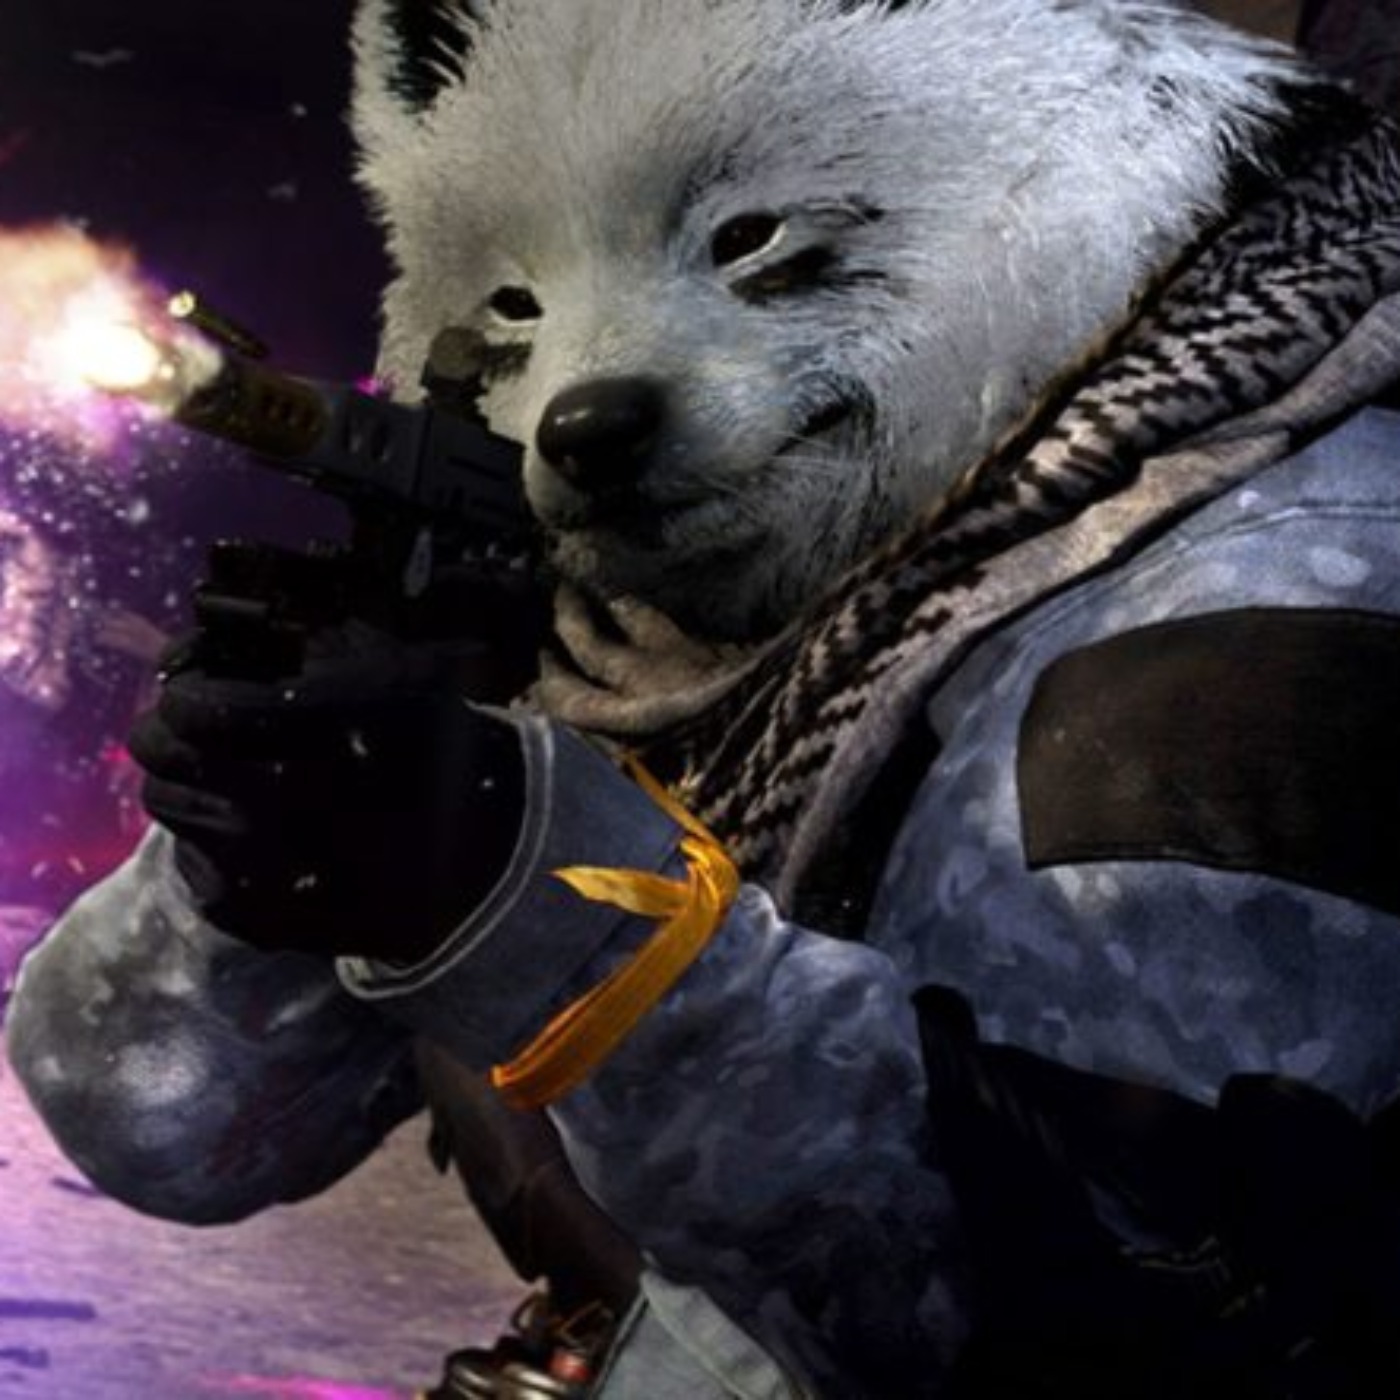 Plagiarism in Call of Duty: The Samoyed skin scandal